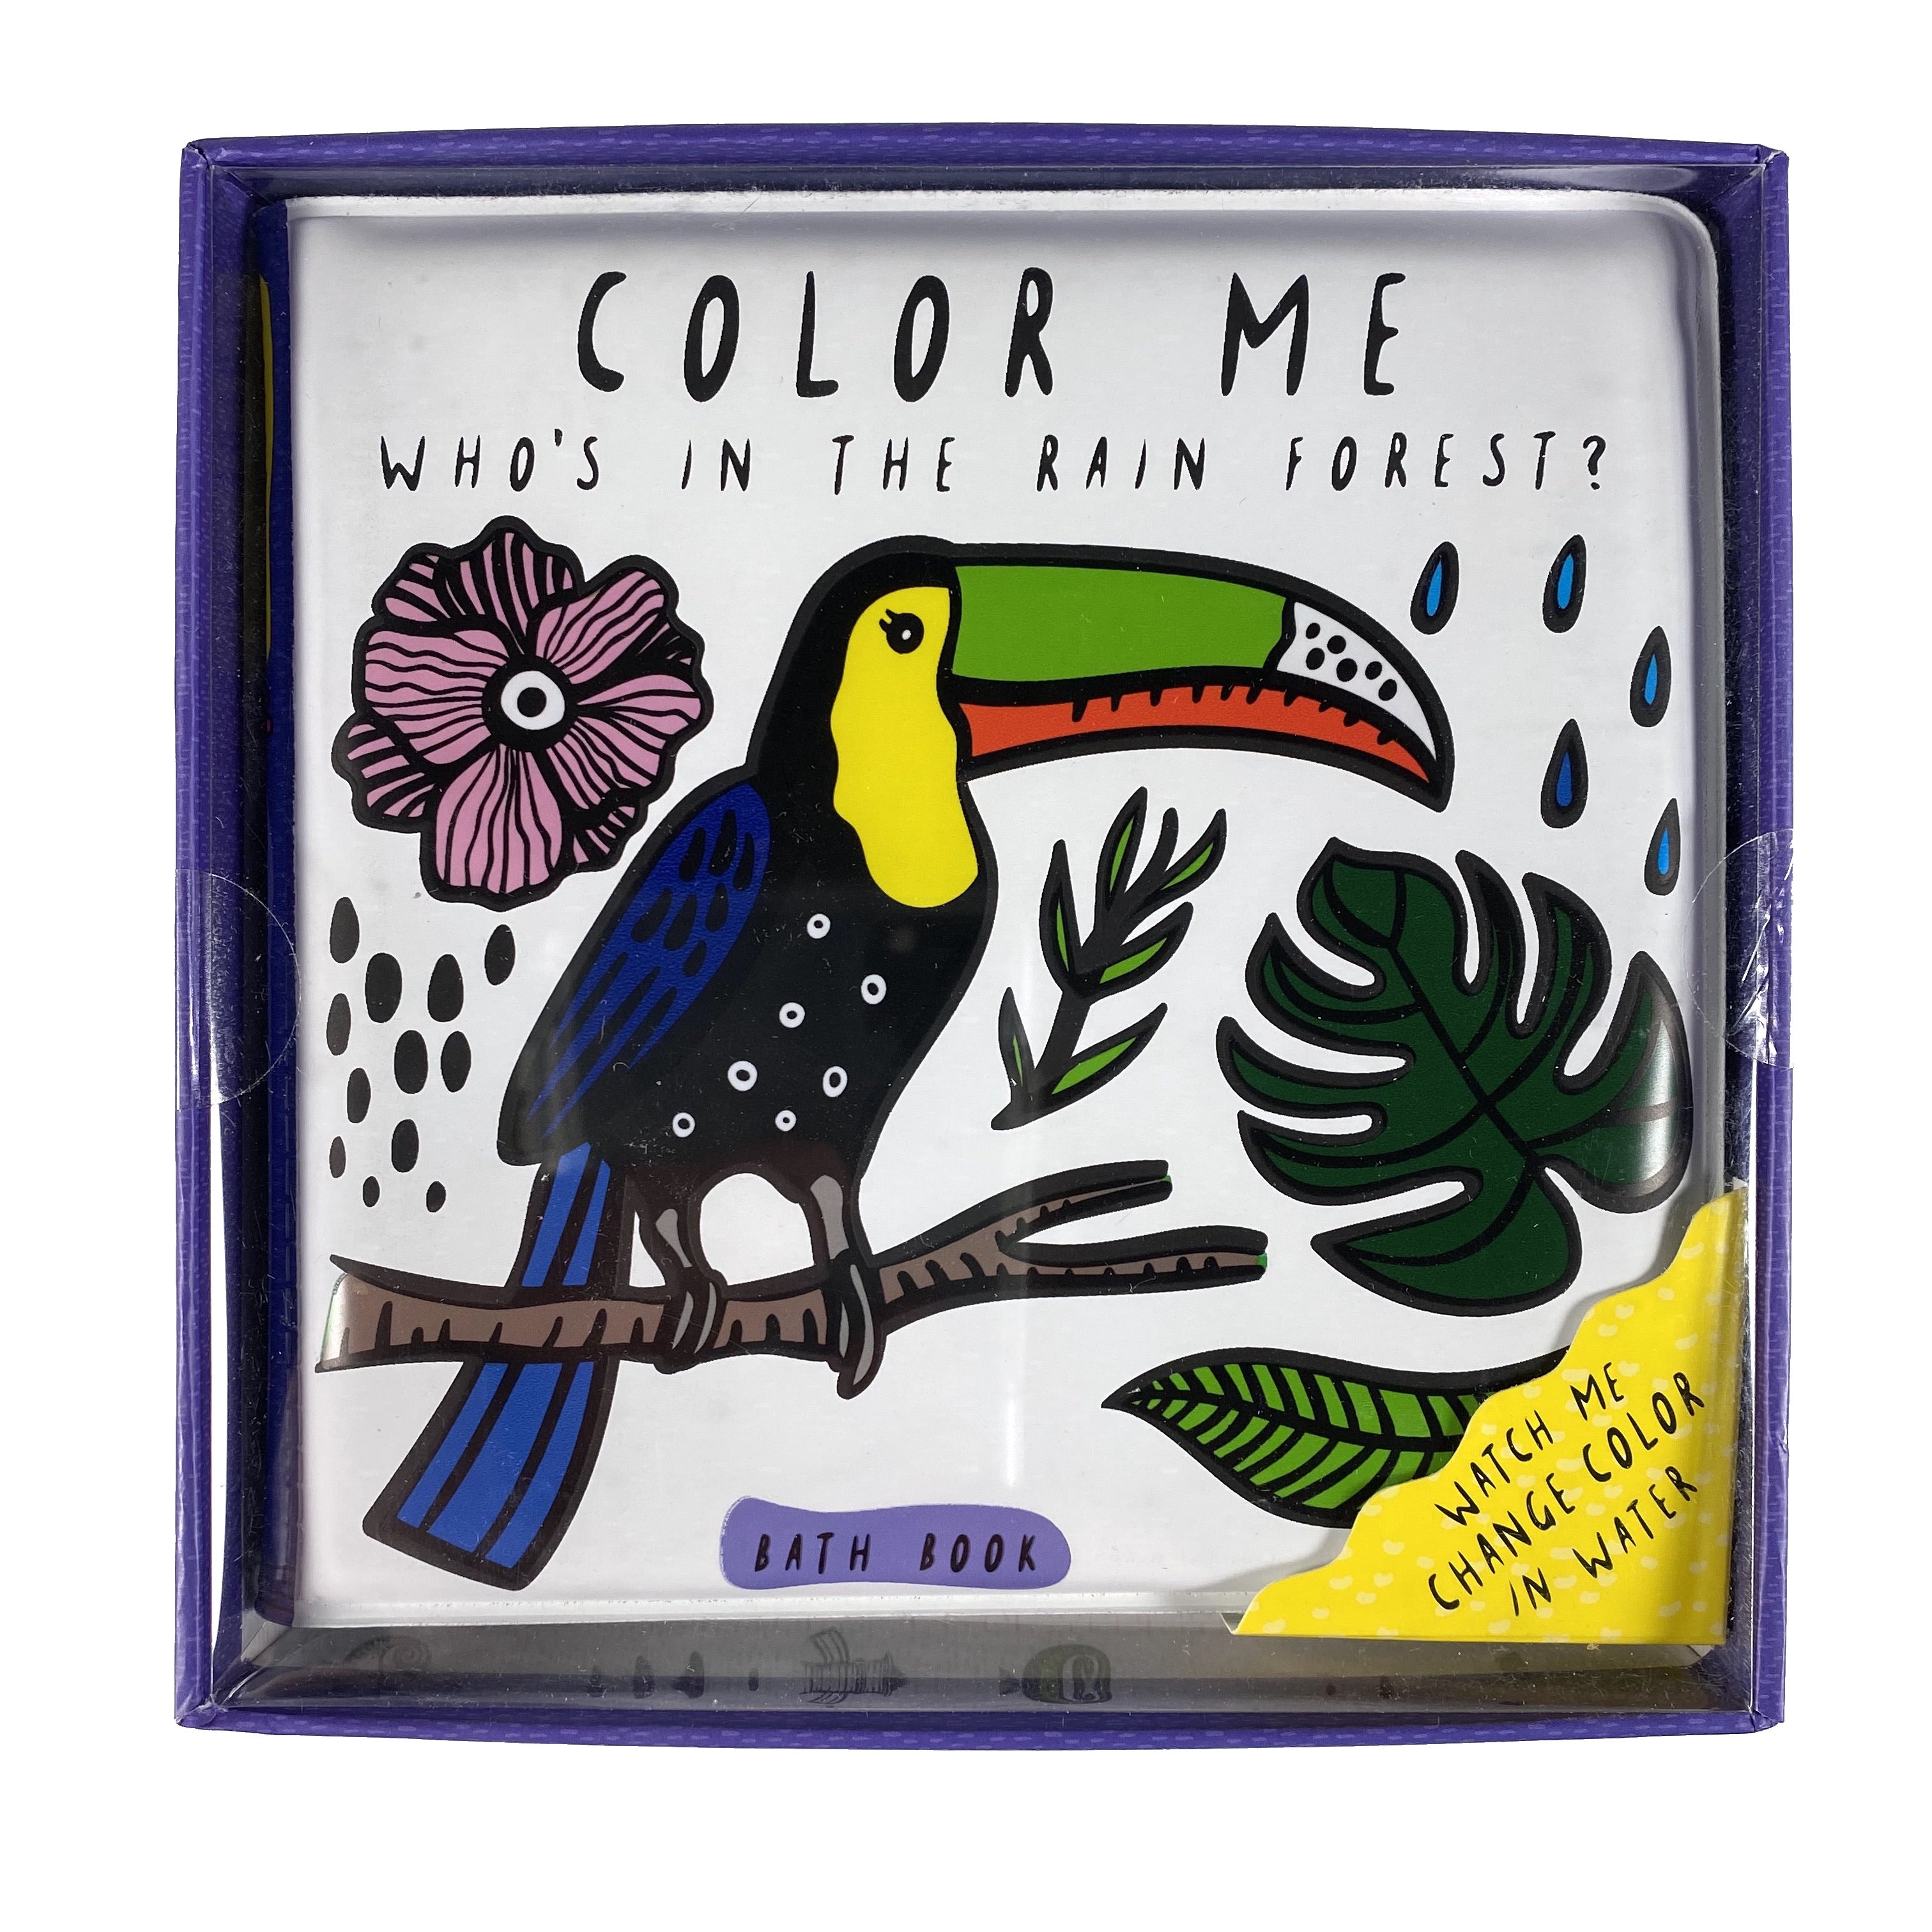 Color Me - Who's in the Rain Forest? Bath Book    